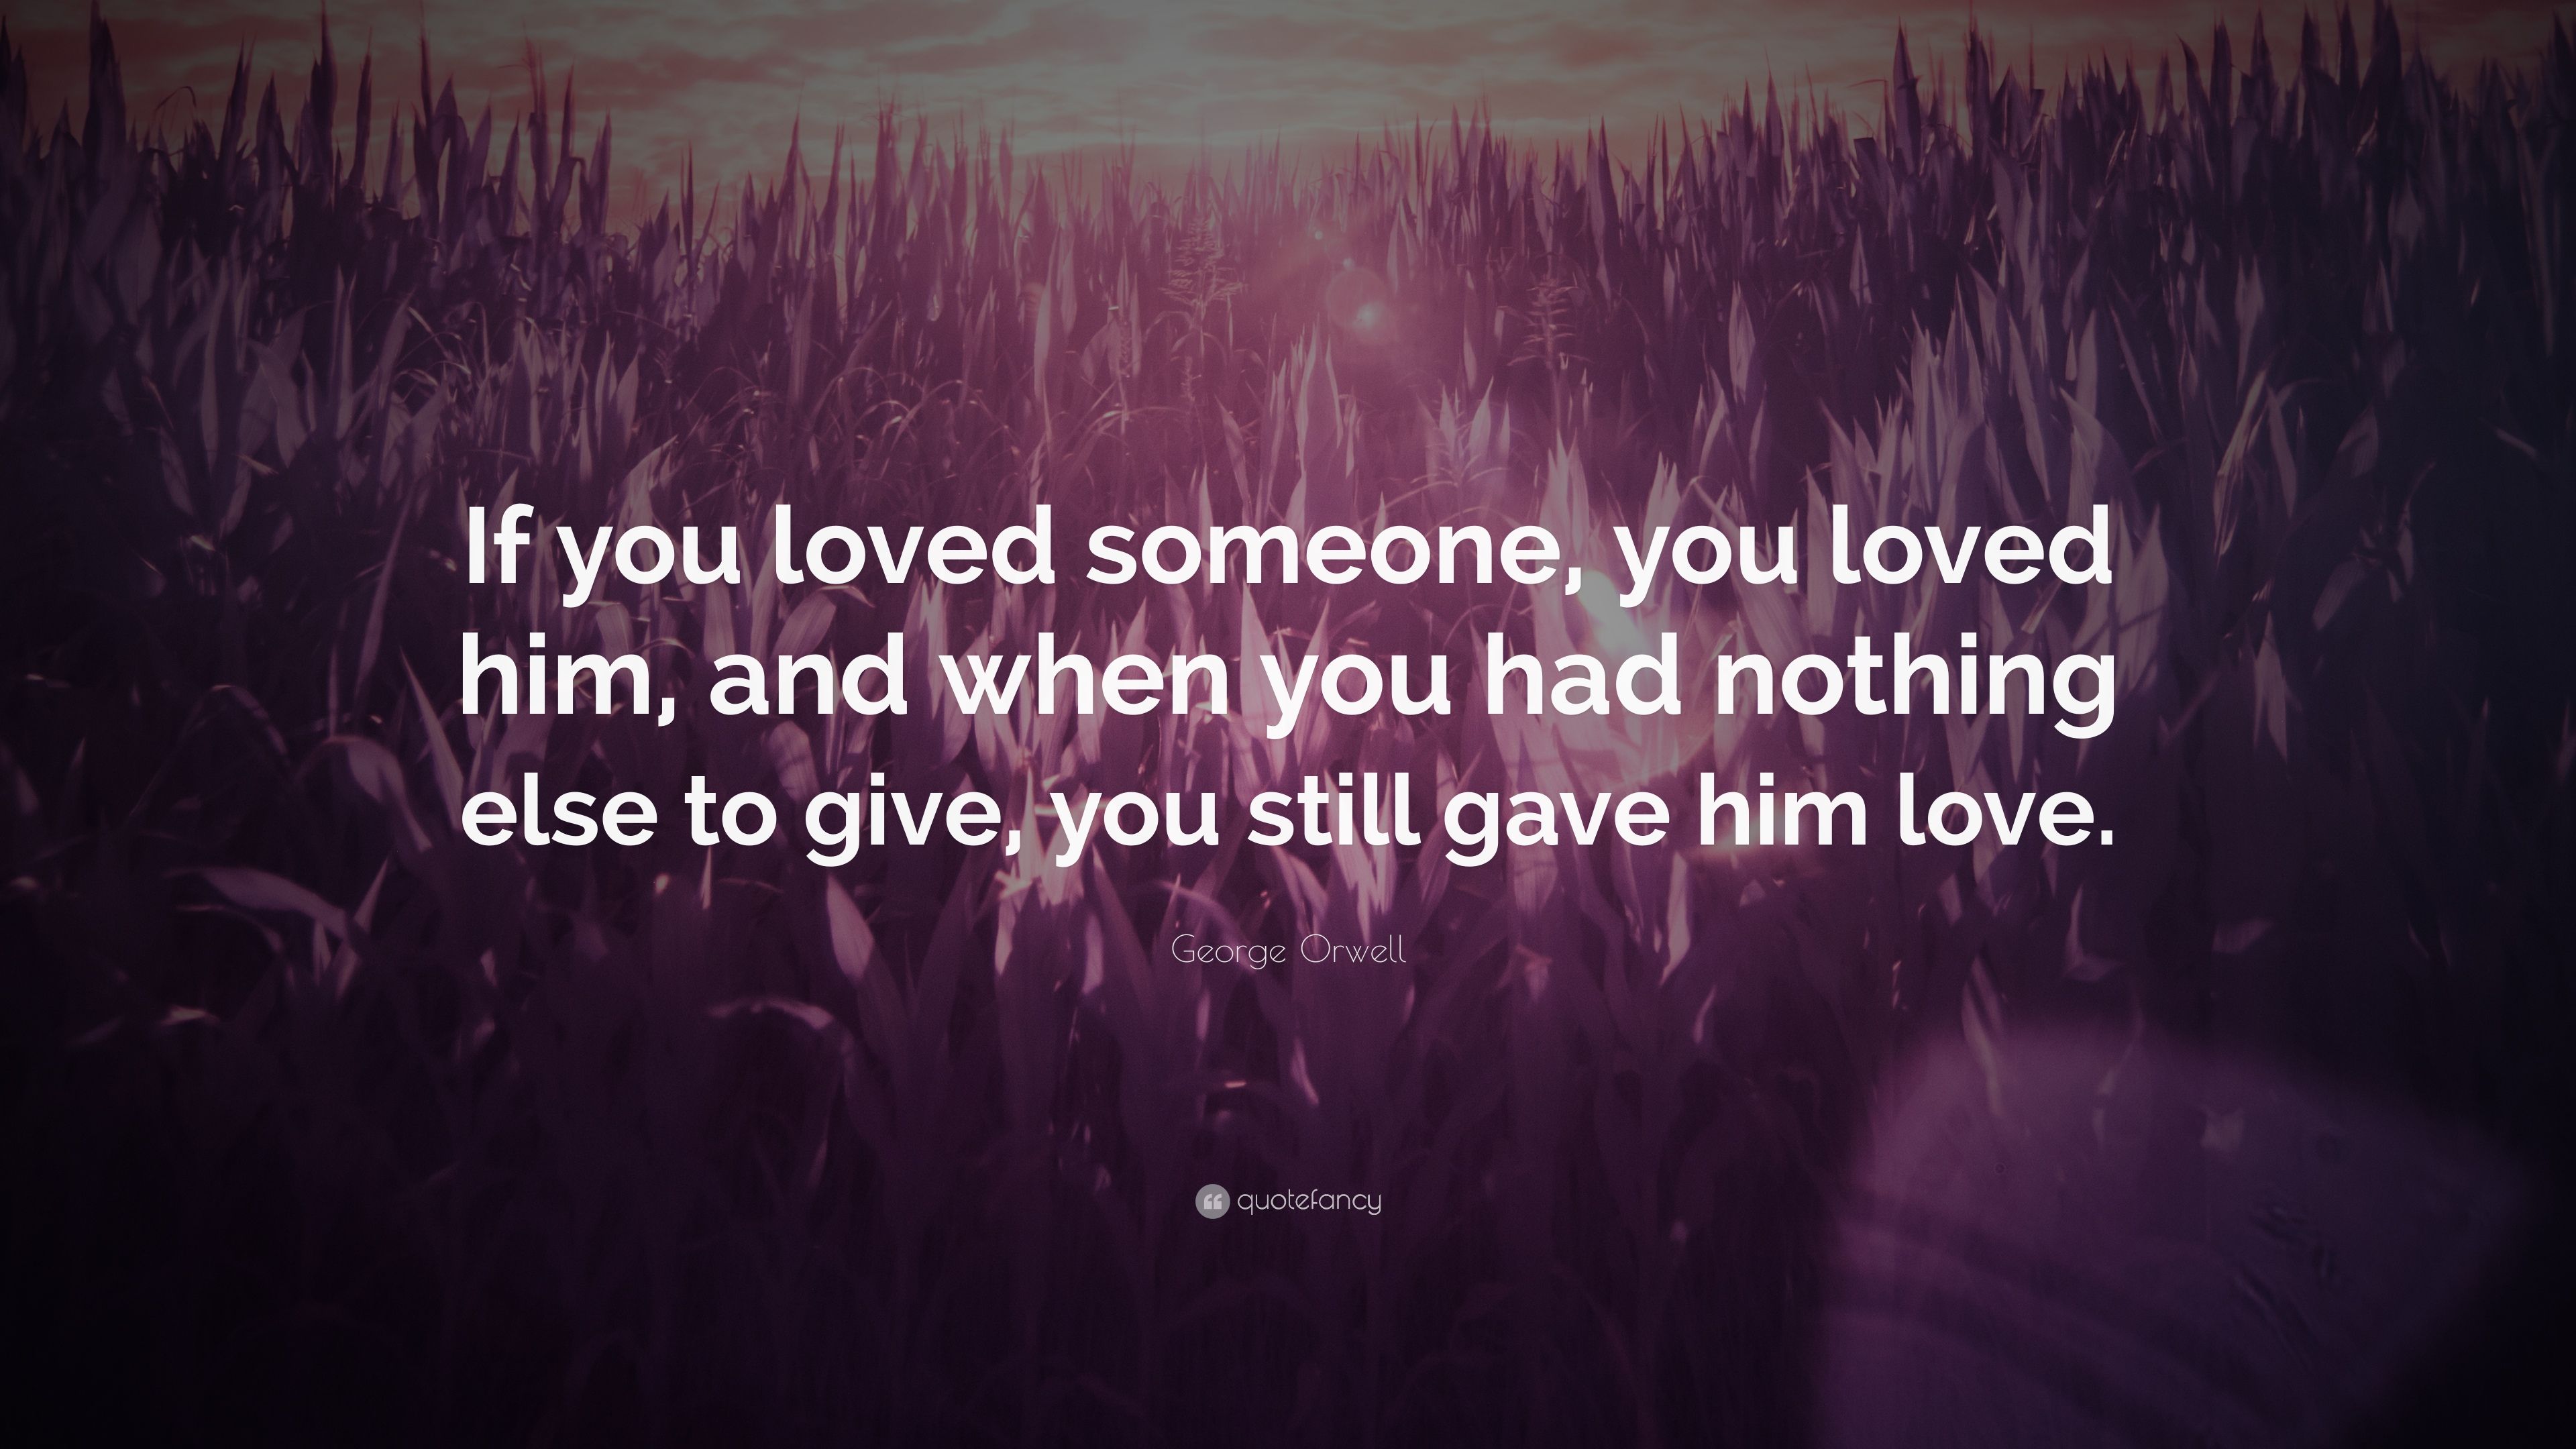 George Orwell Quote: “If you loved someone, you loved him